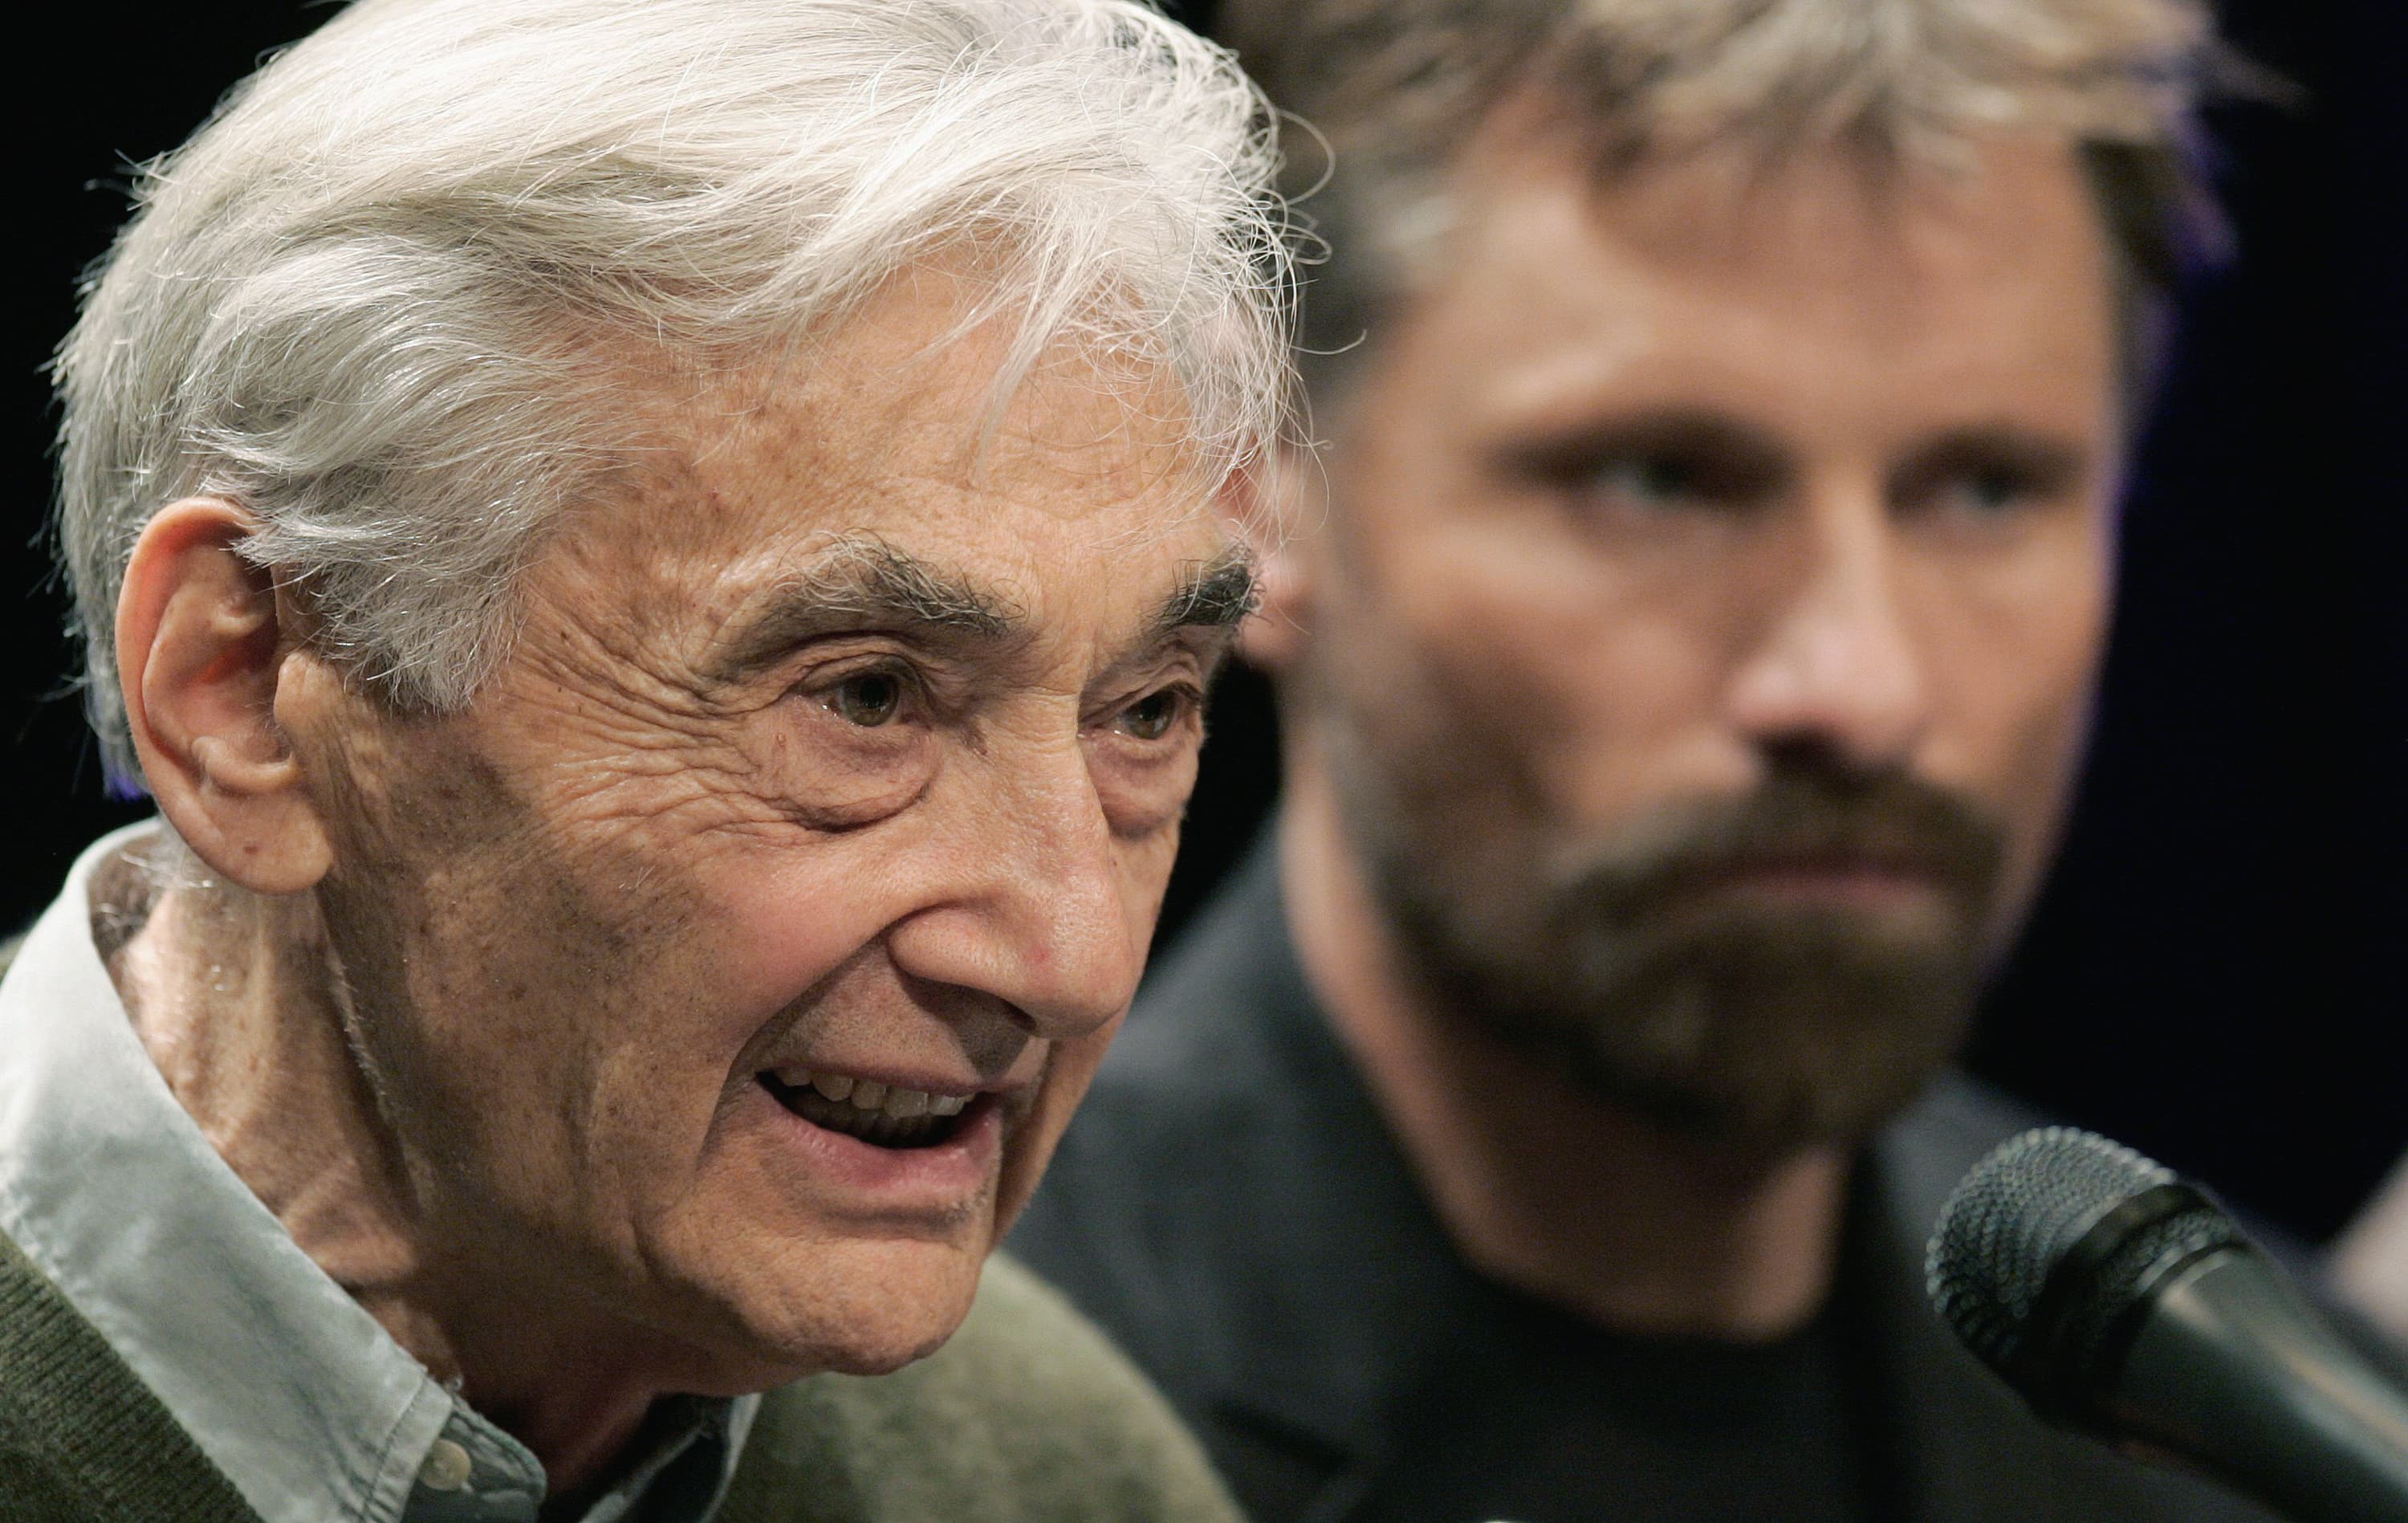 Howard Zinn and actor Viggo Mortensen take part in a 2008 panel discussion about &quot;The People Speak&quot; at Emerson College in Boston. (Michael Dwyer/AP)